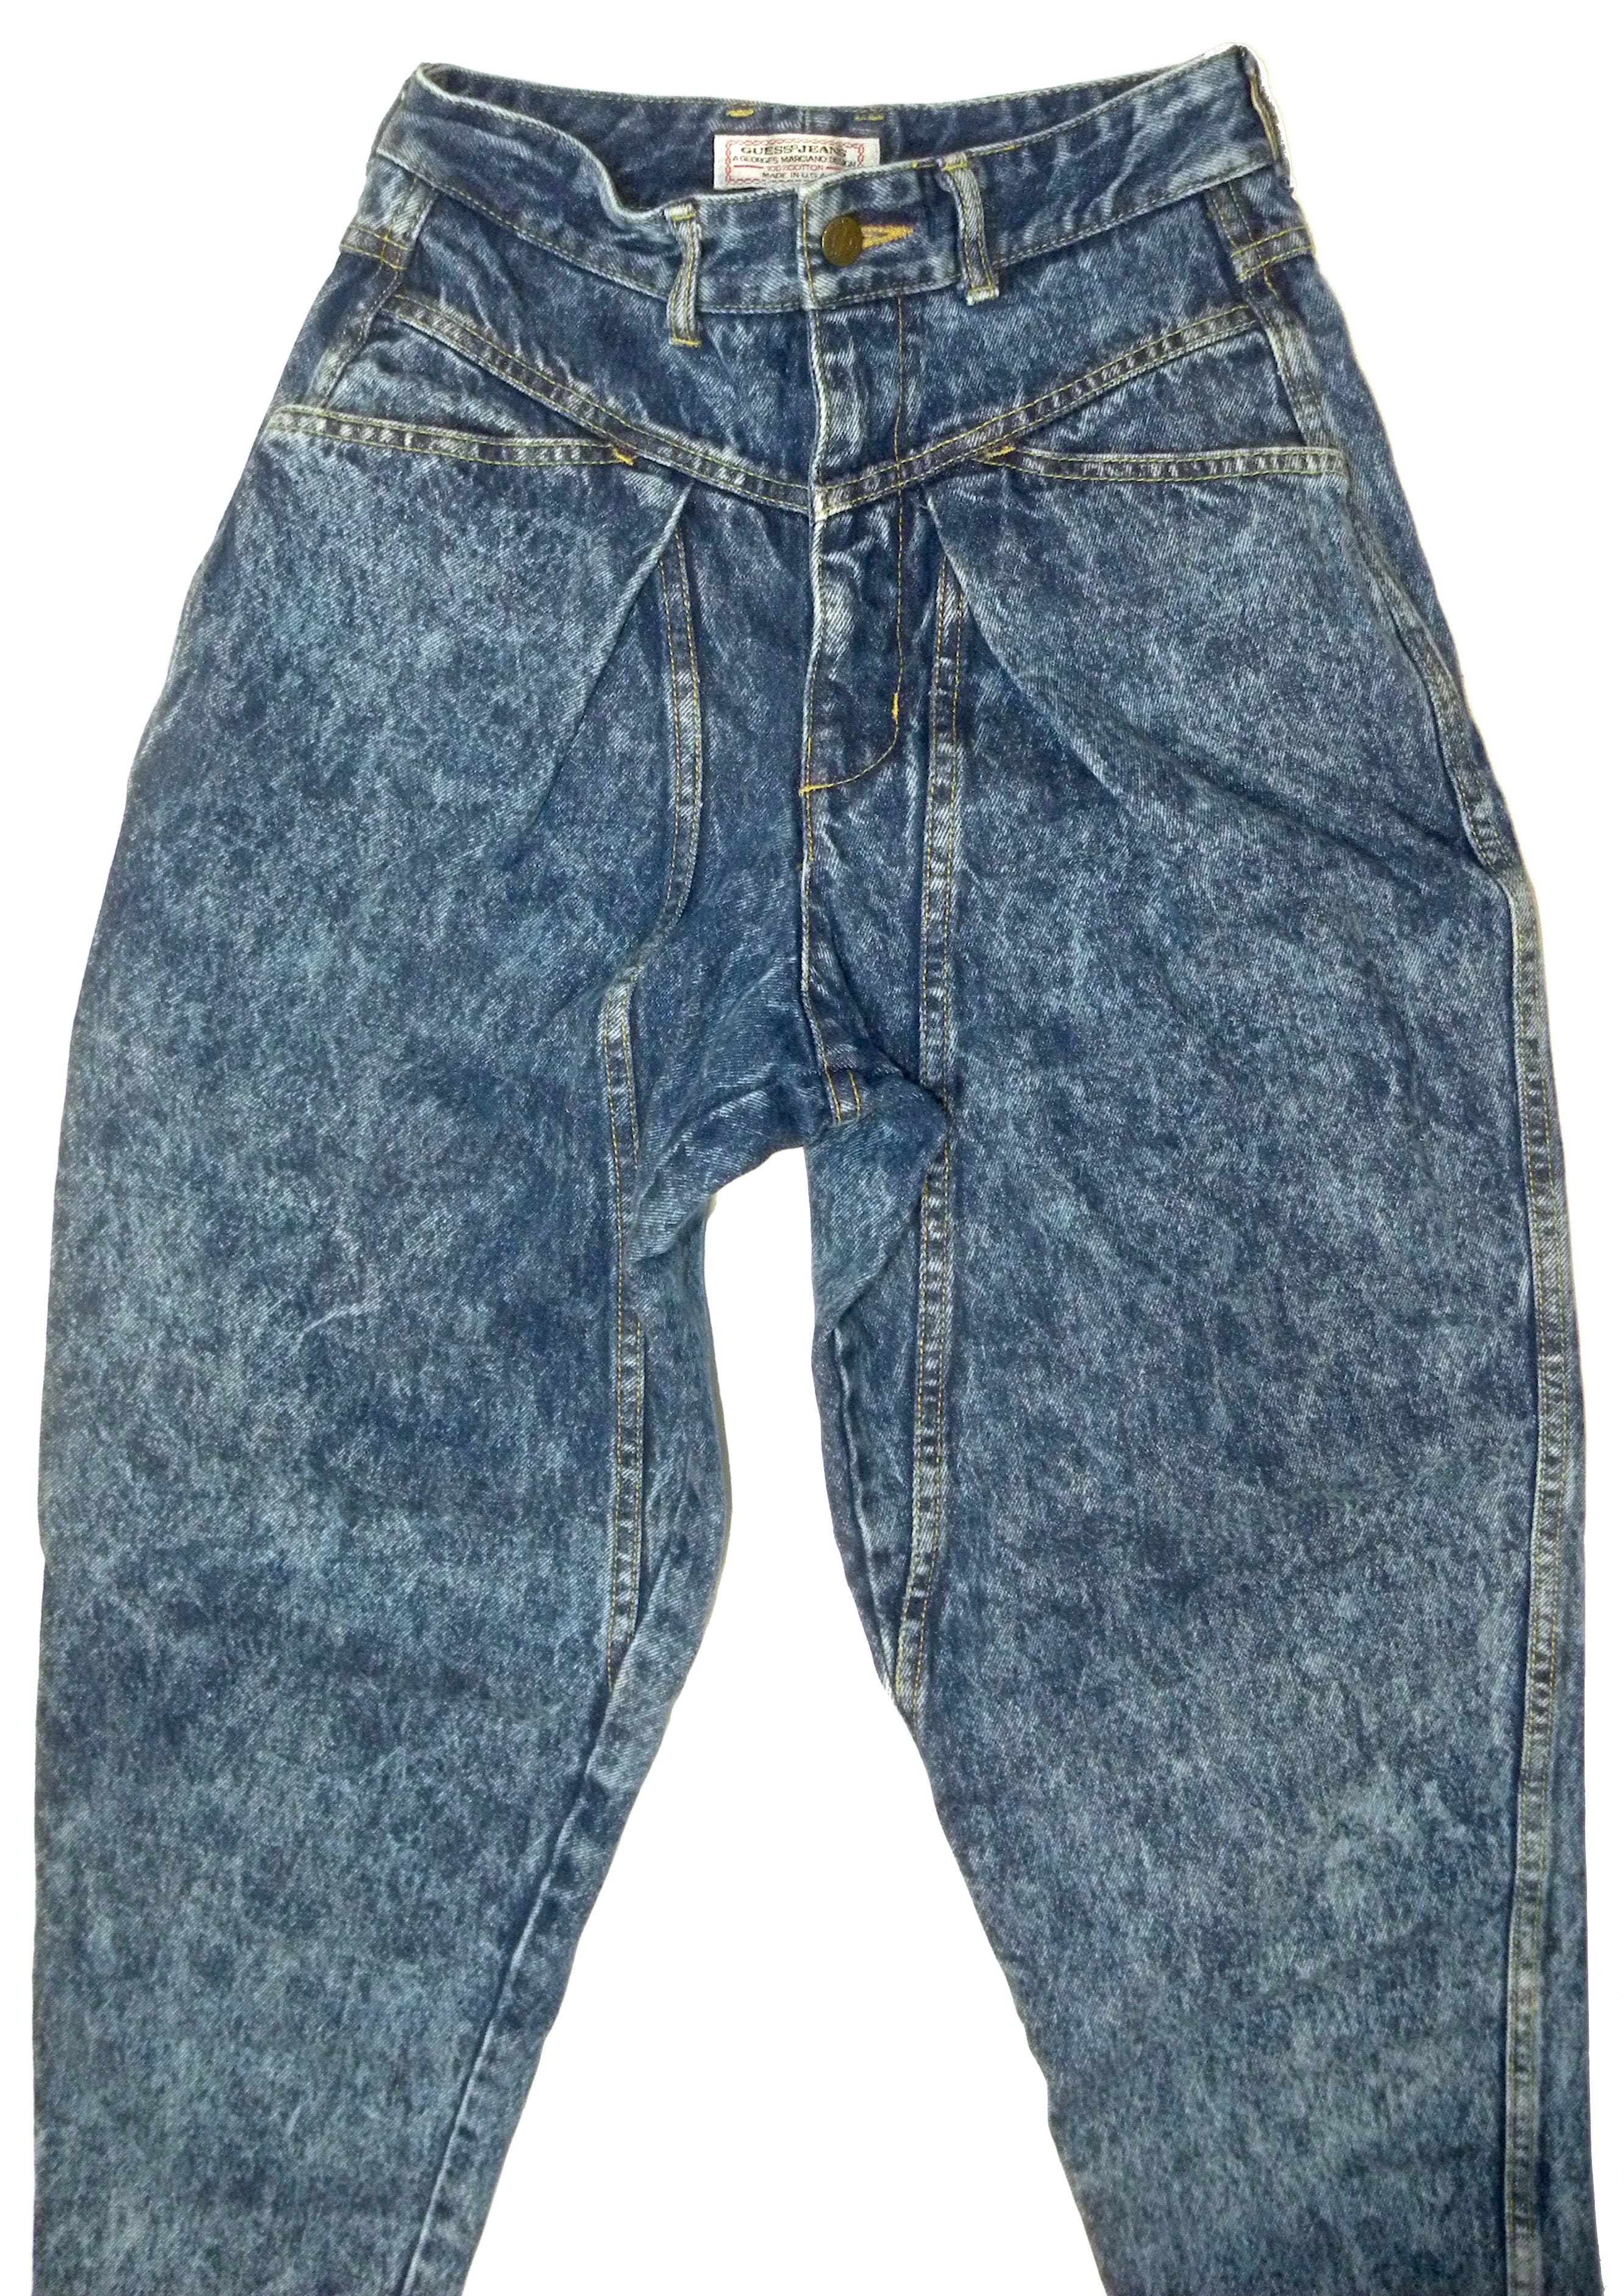 Vintage 90s Ultra High Waisted Tapered Acid Wash Jeans By Guess | Shop ...